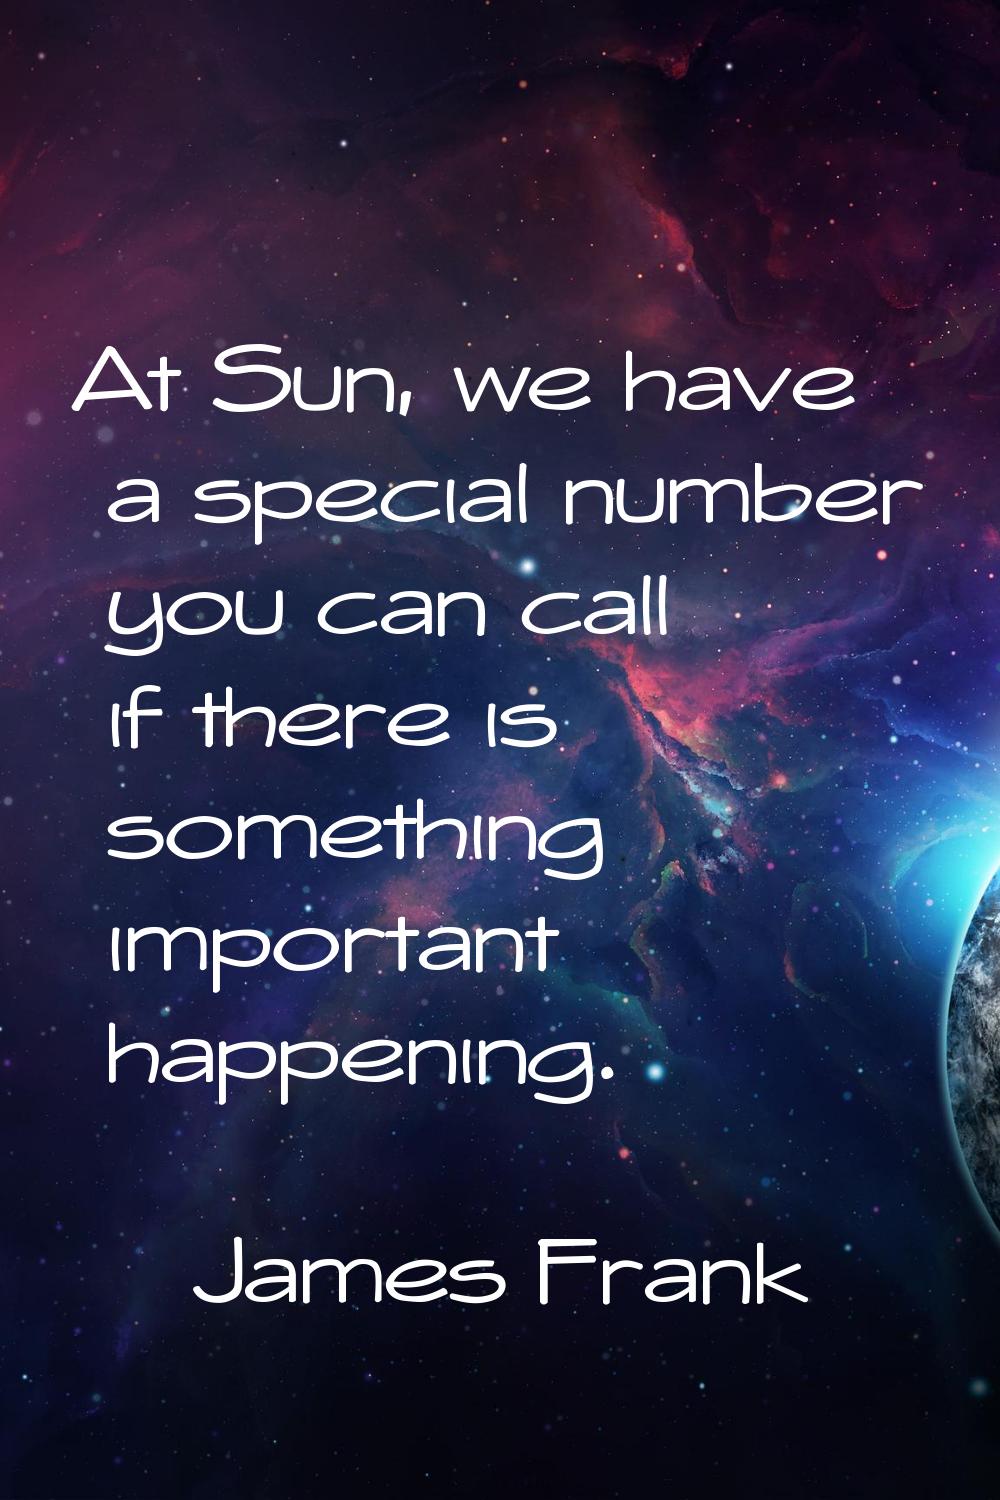 At Sun, we have a special number you can call if there is something important happening.